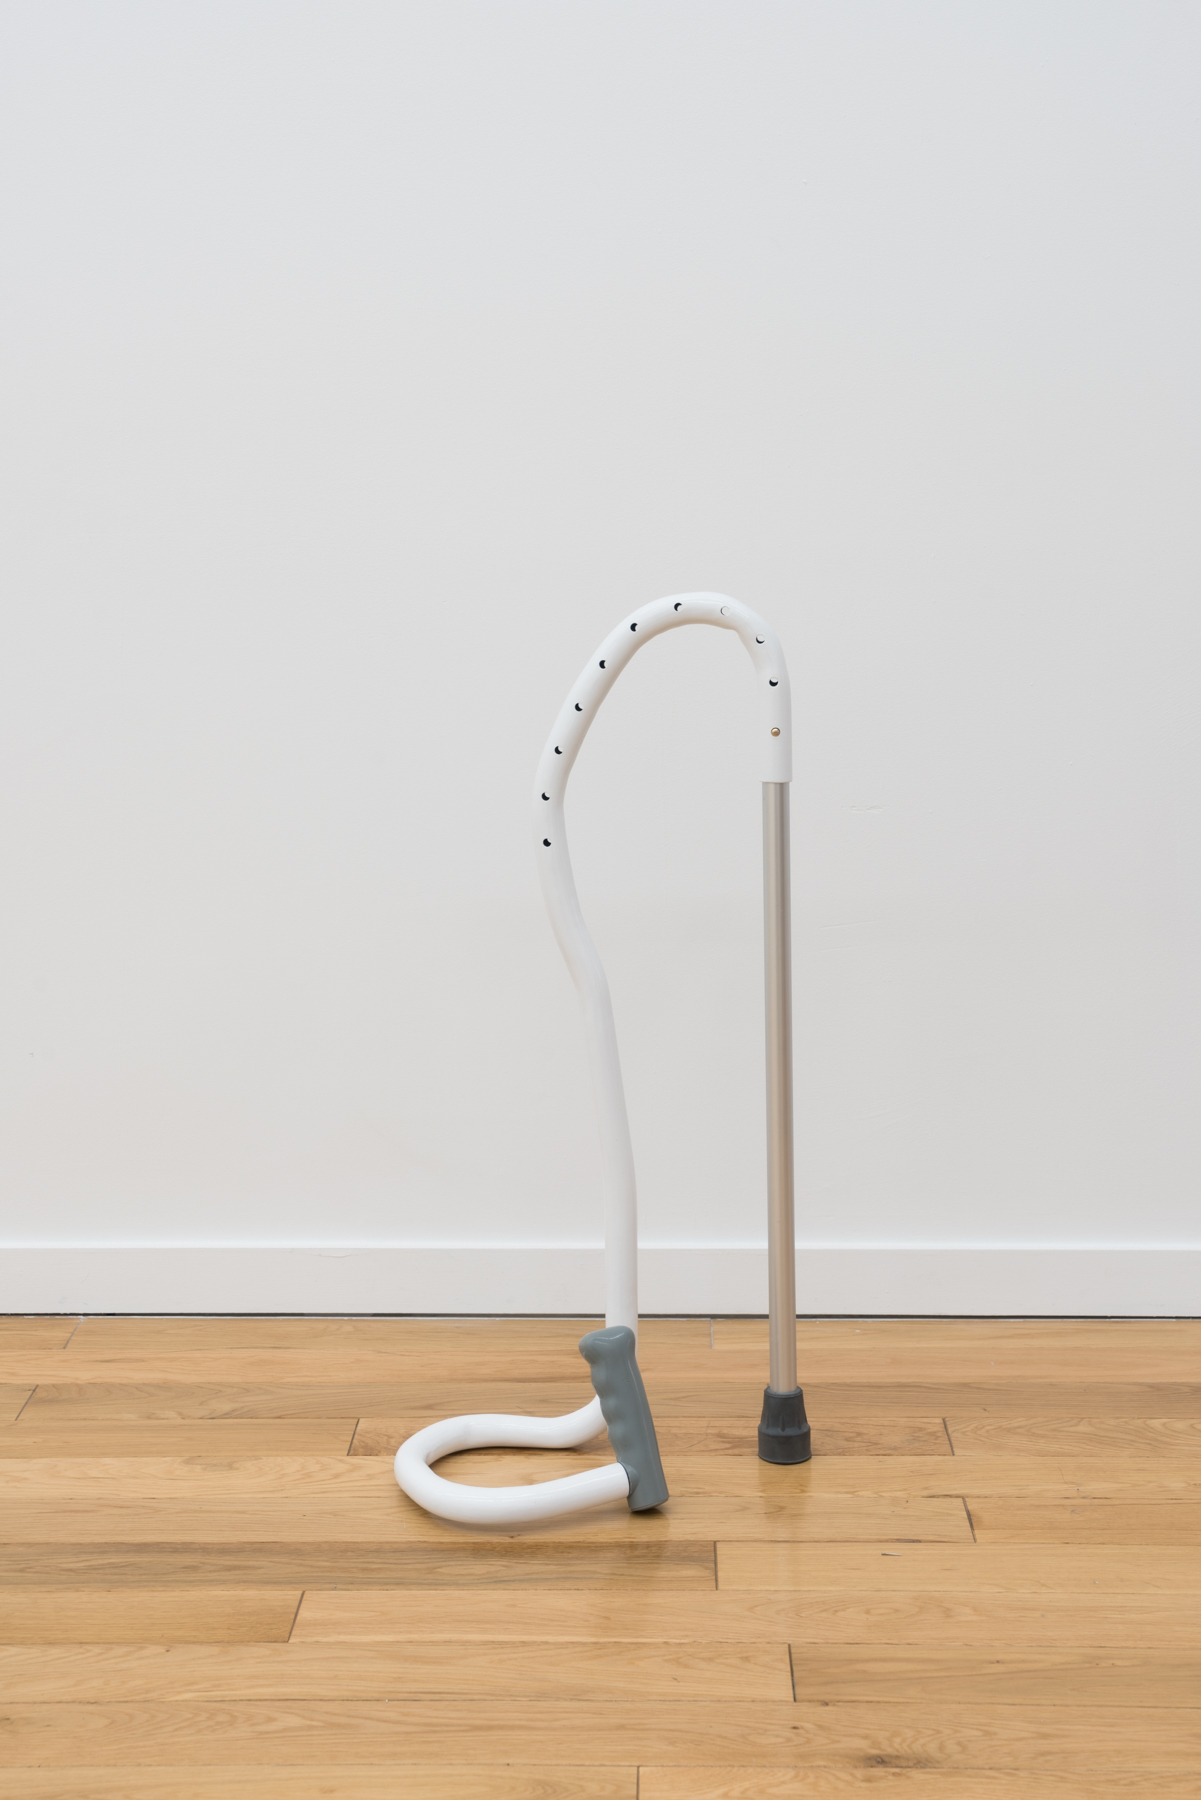 sculpture conveying a metal rod with a black stopper and a white tube coming out the top